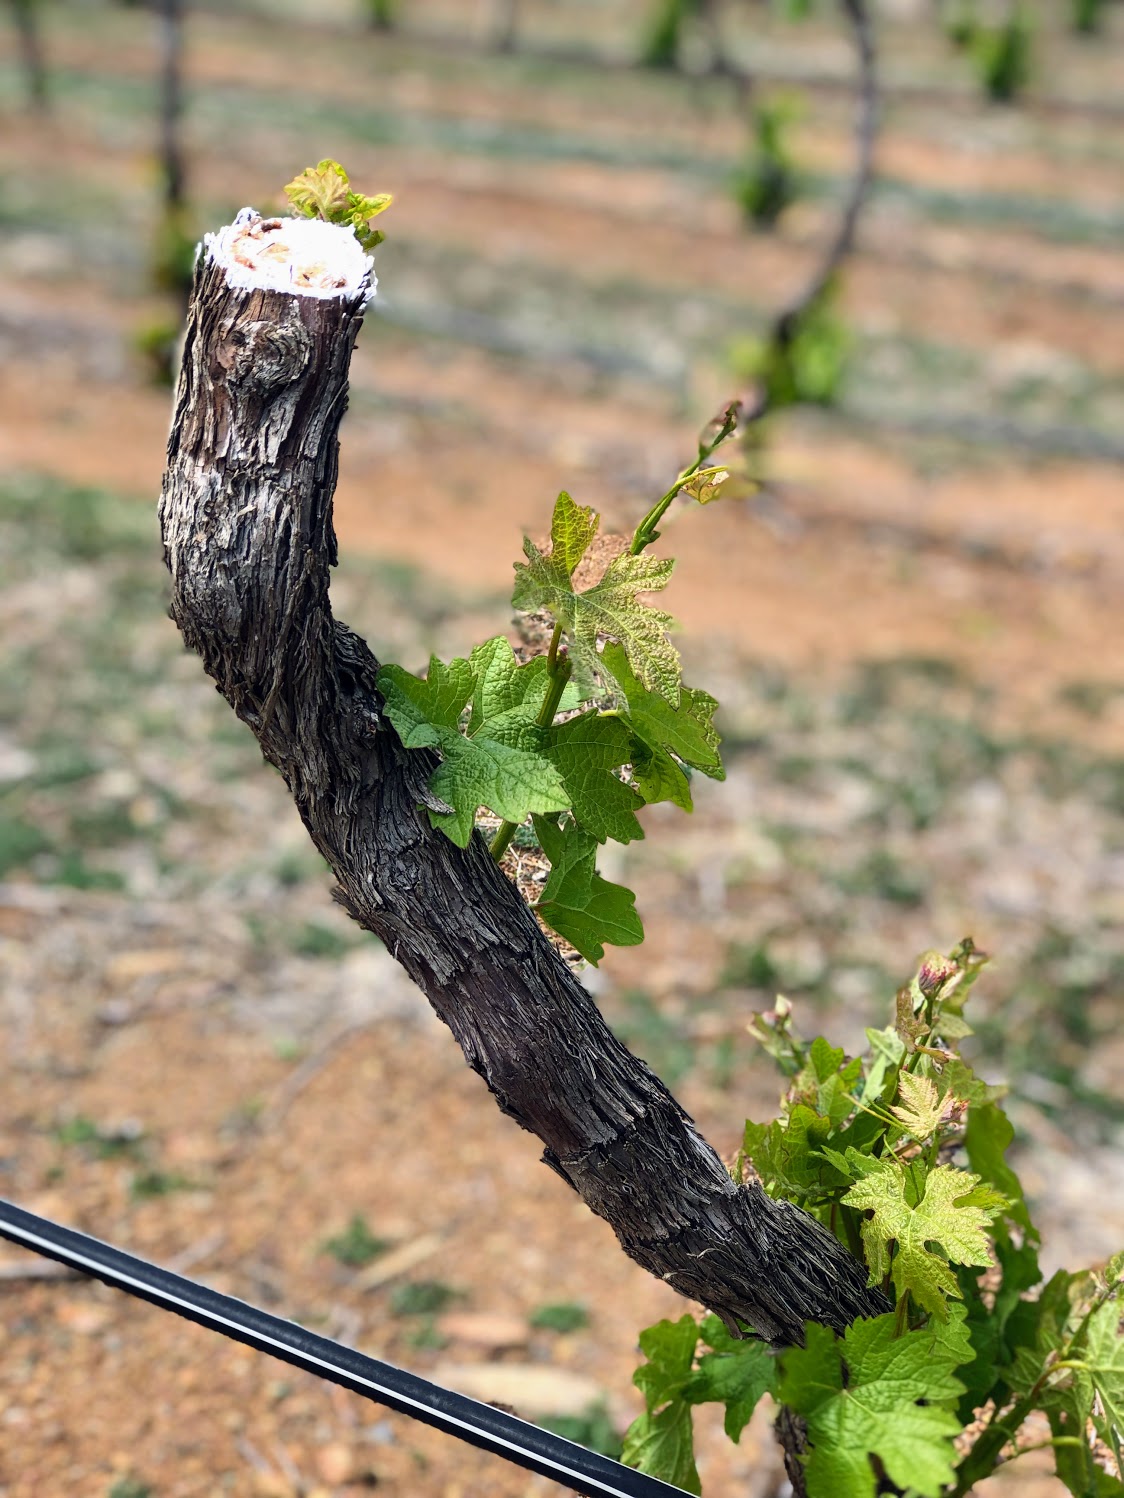 Merlot vine that has been chopped off